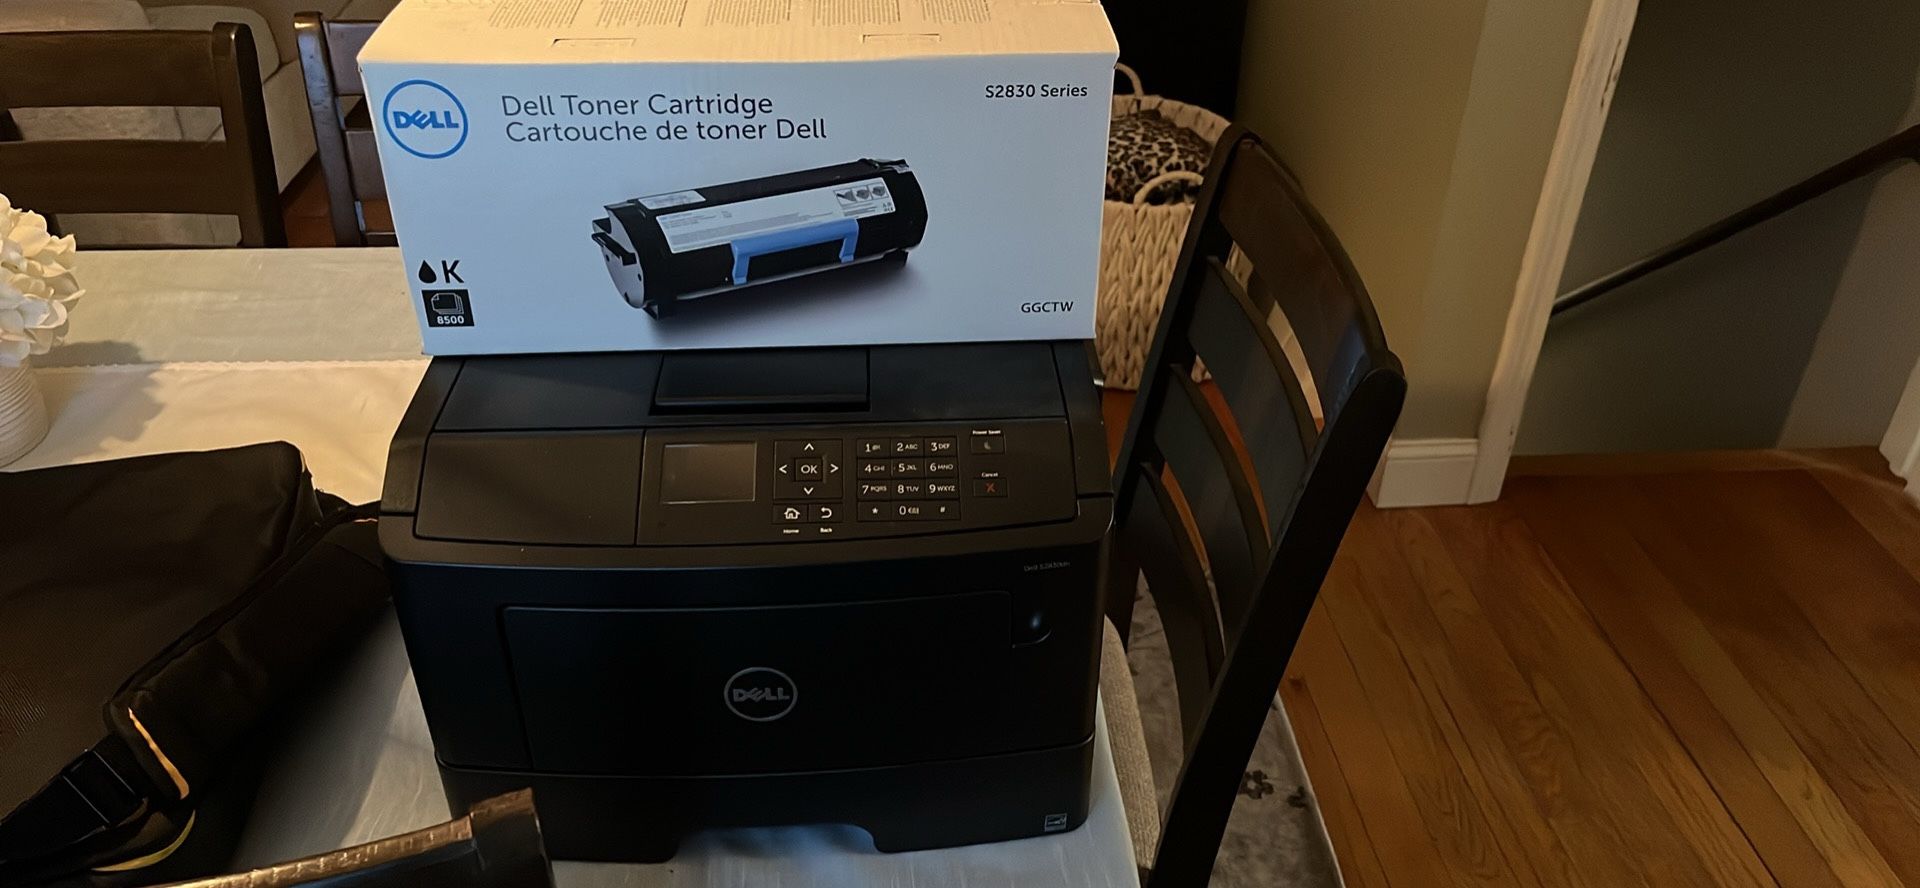 DELL Printer With Brand New Cartridge 